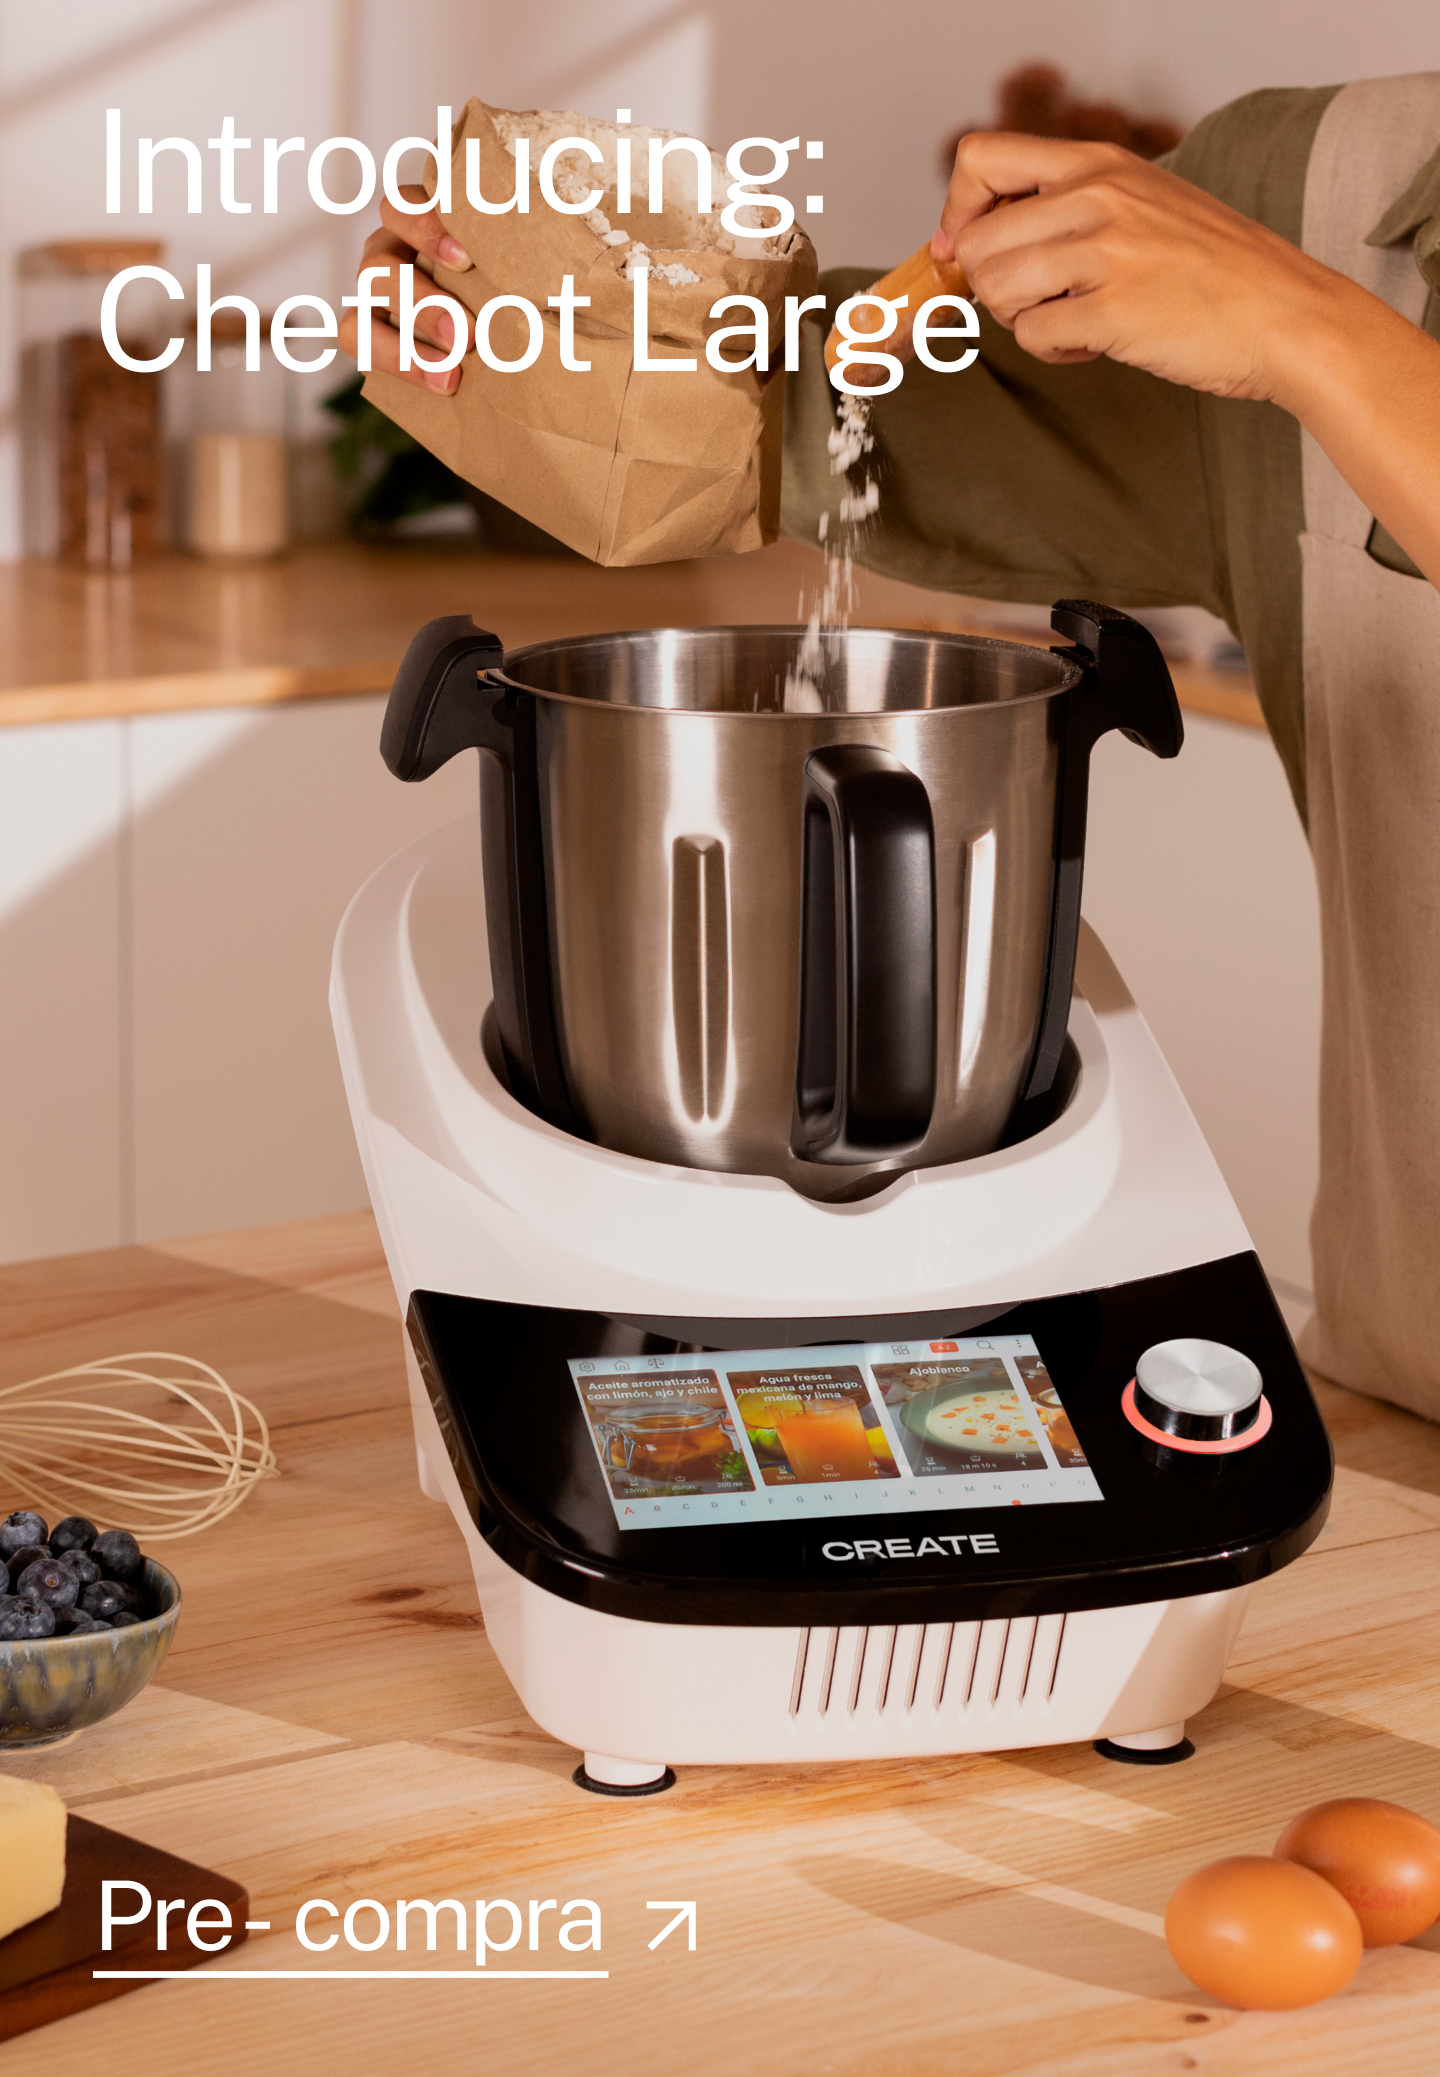 Create Ikohs presenta Chefbot Touch Large